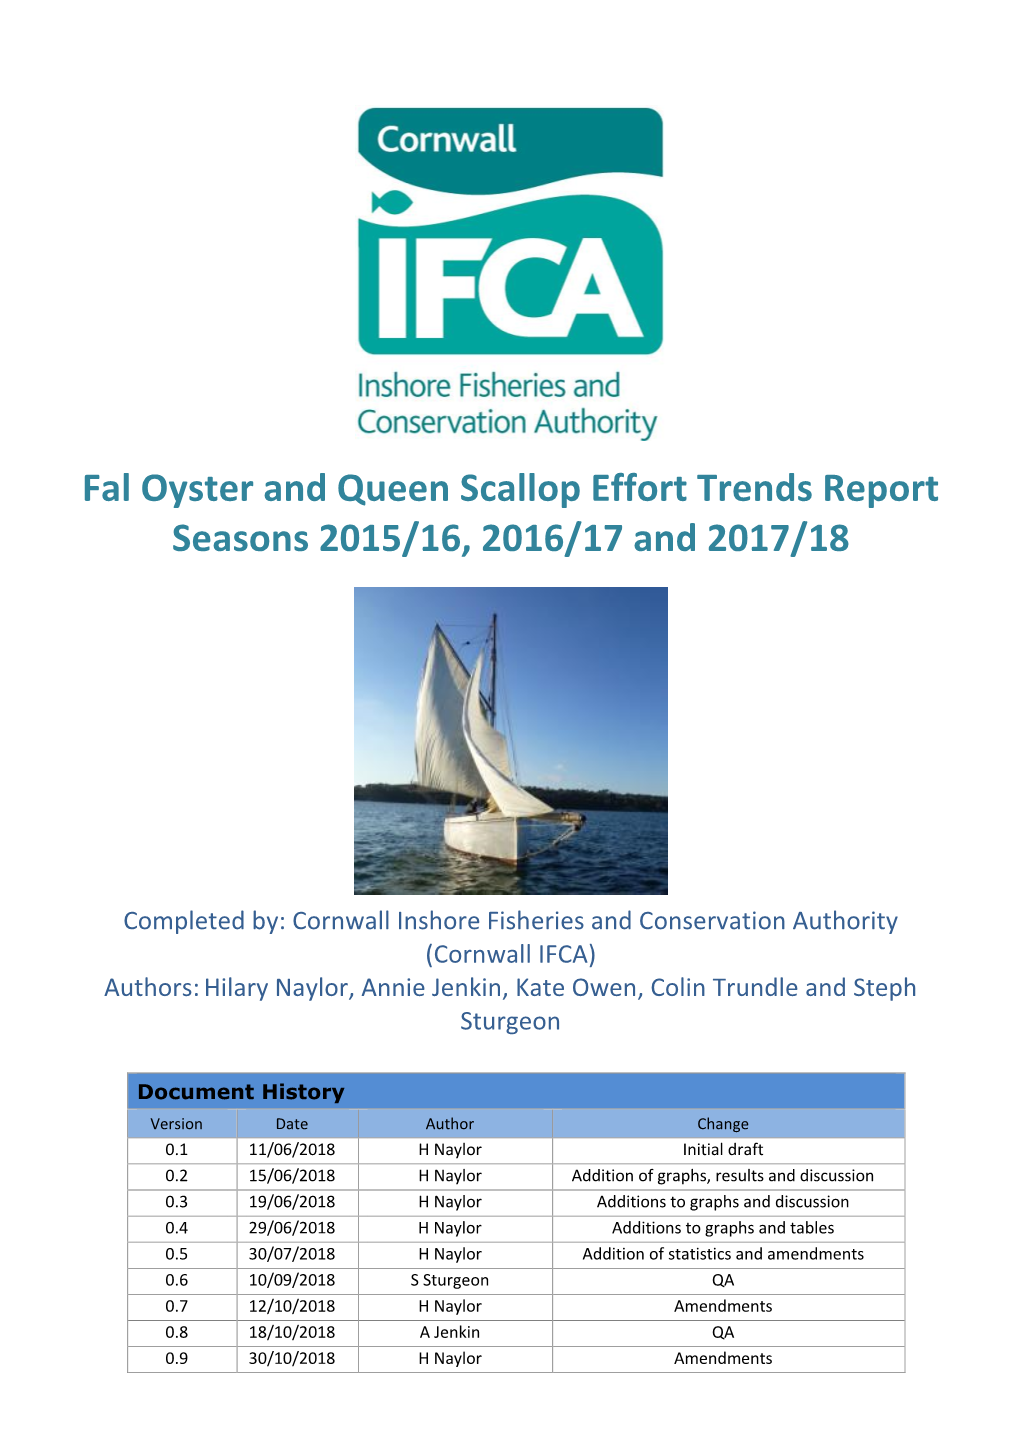 Fal Oyster and Queen Scallop Effort Trends Report Seasons 2015/16, 2016/17 and 2017/18